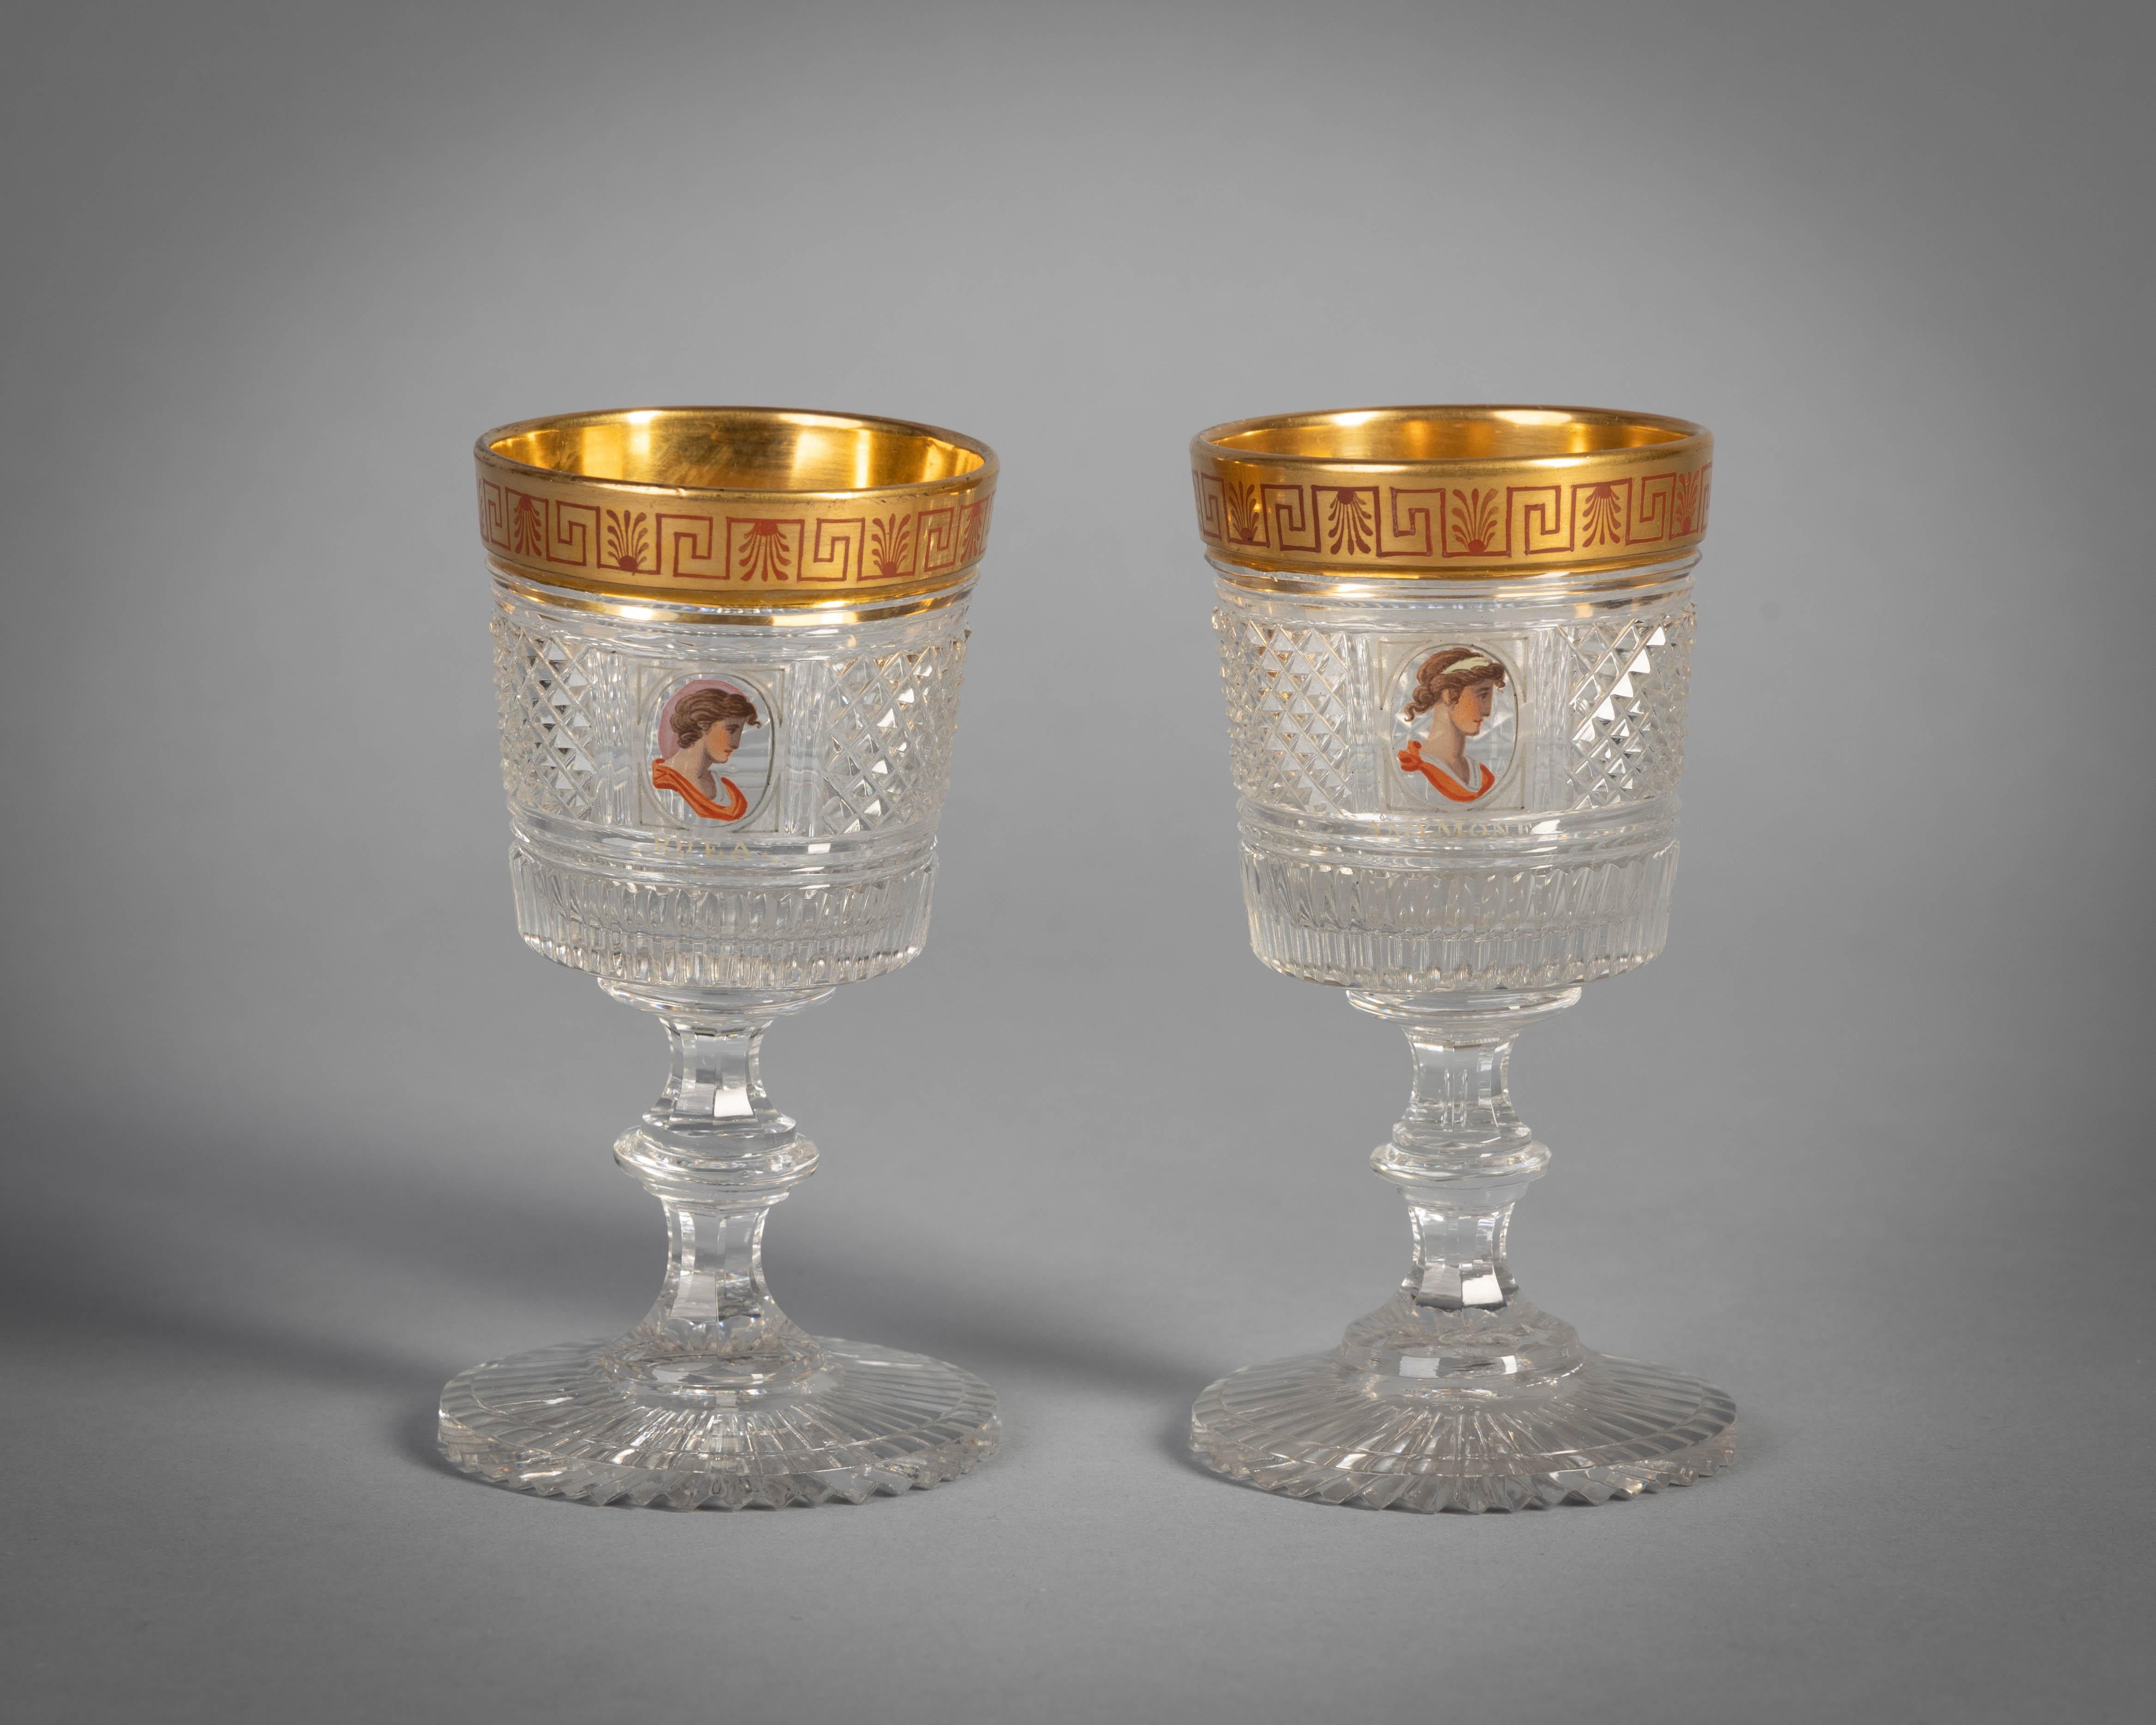 Extensive English Faceted and Enameled and Gilt Glass Service, circa 1815 For Sale 2